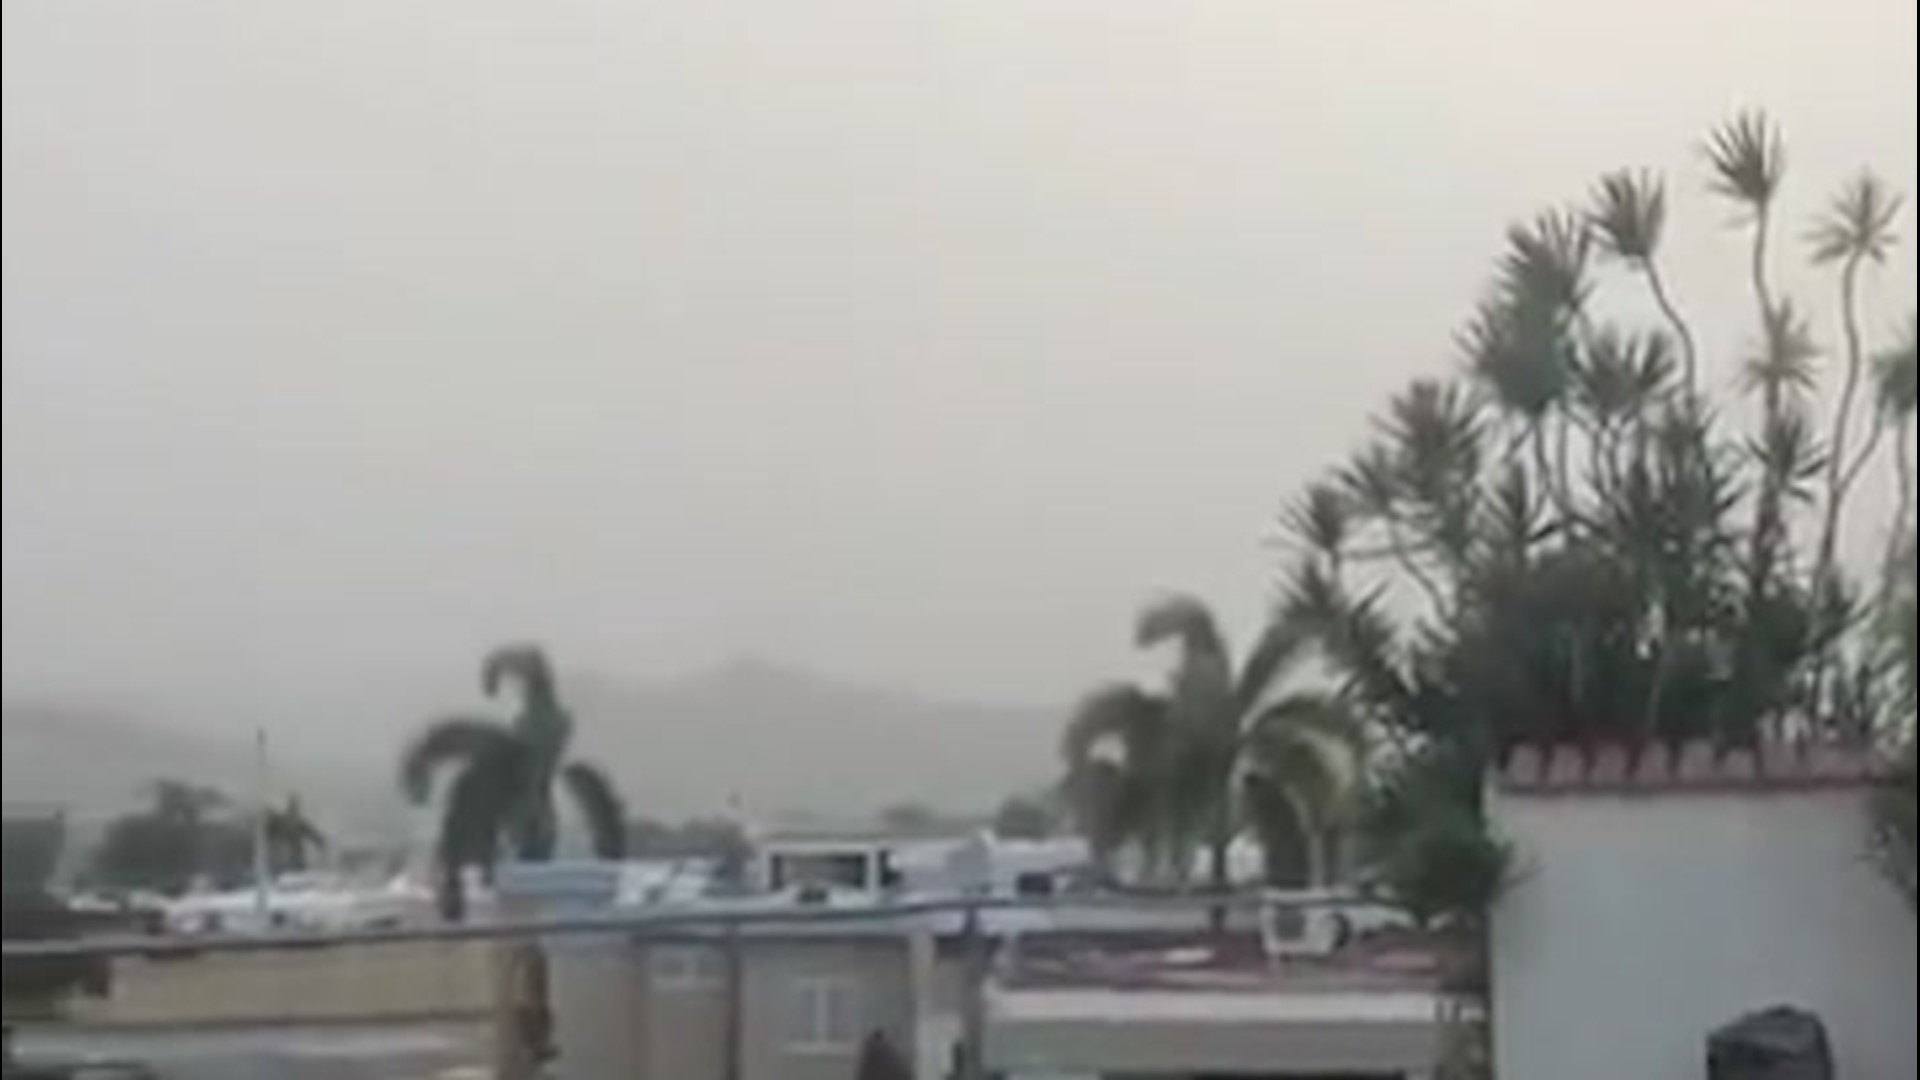 The difference between the visibility in Yauco, Puerto Rico, was night and day from this past May to June 22, as Saharan dust obscured visibility.